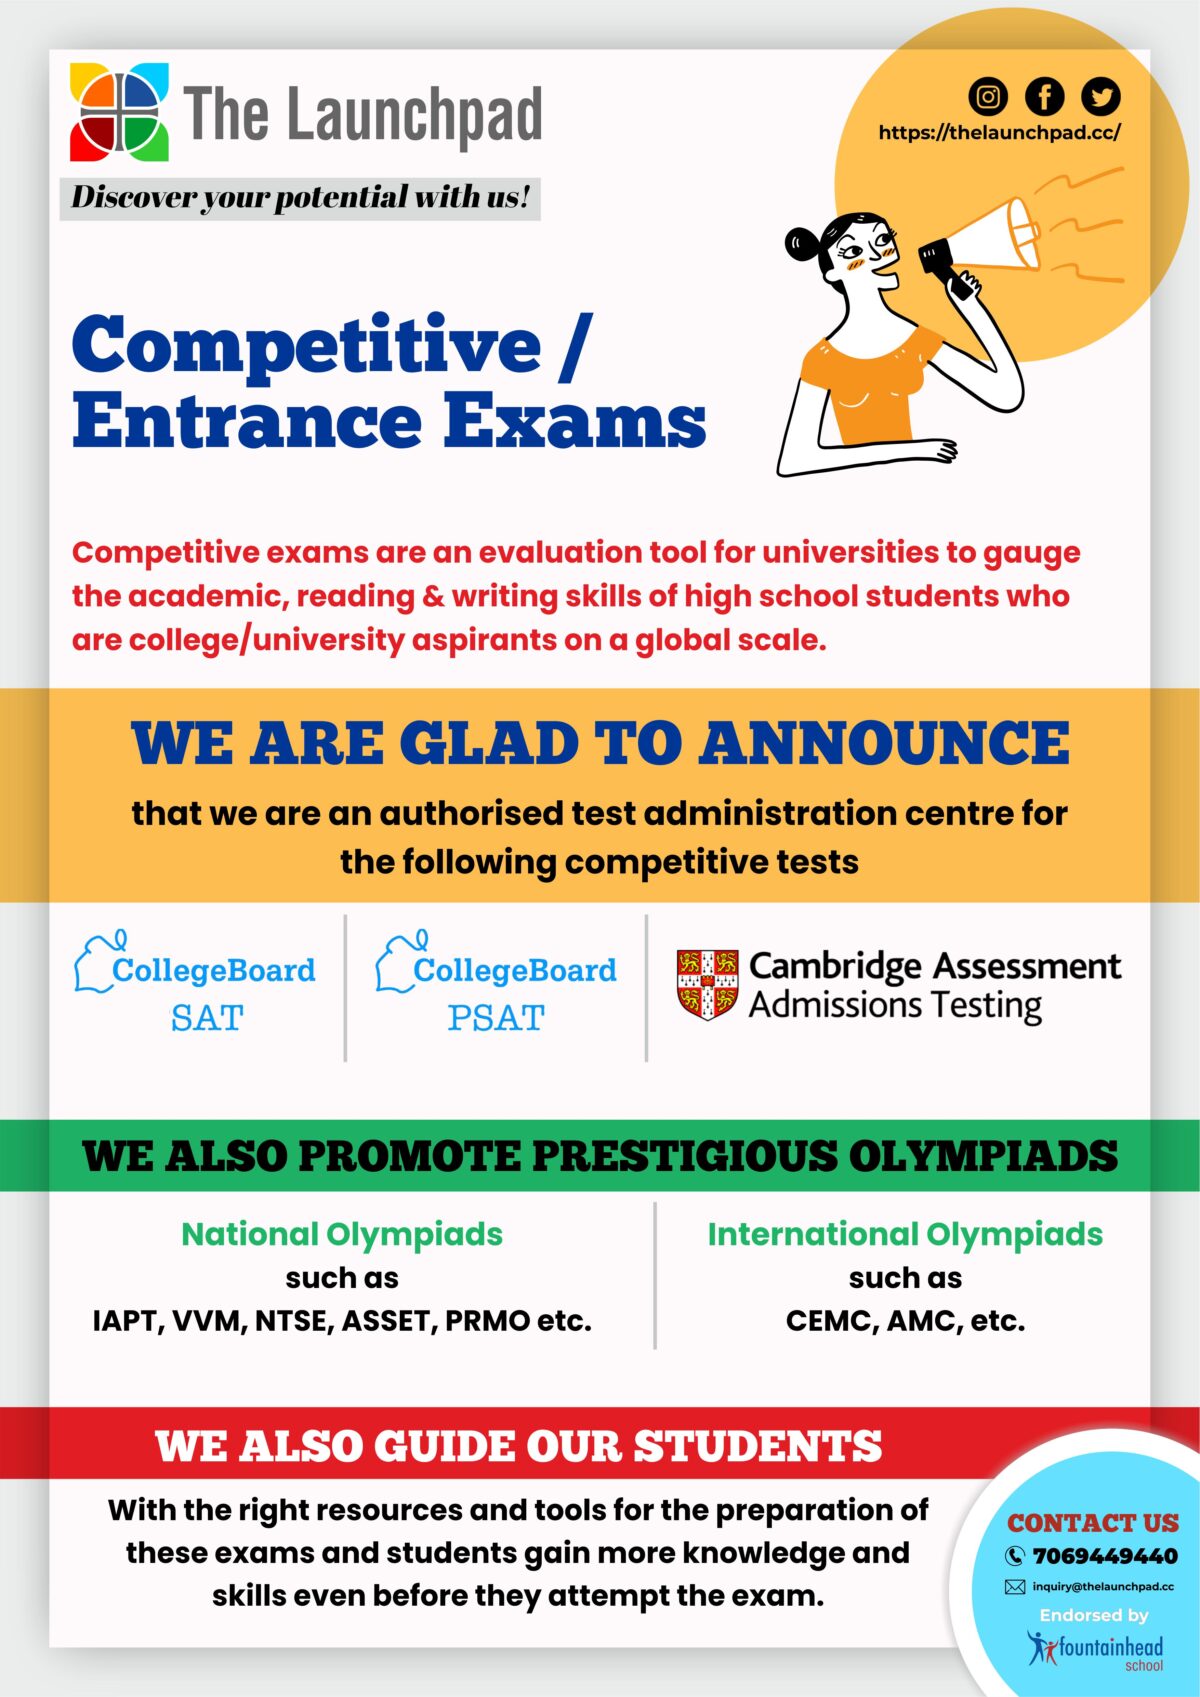 05_Competitive Entrance Exams